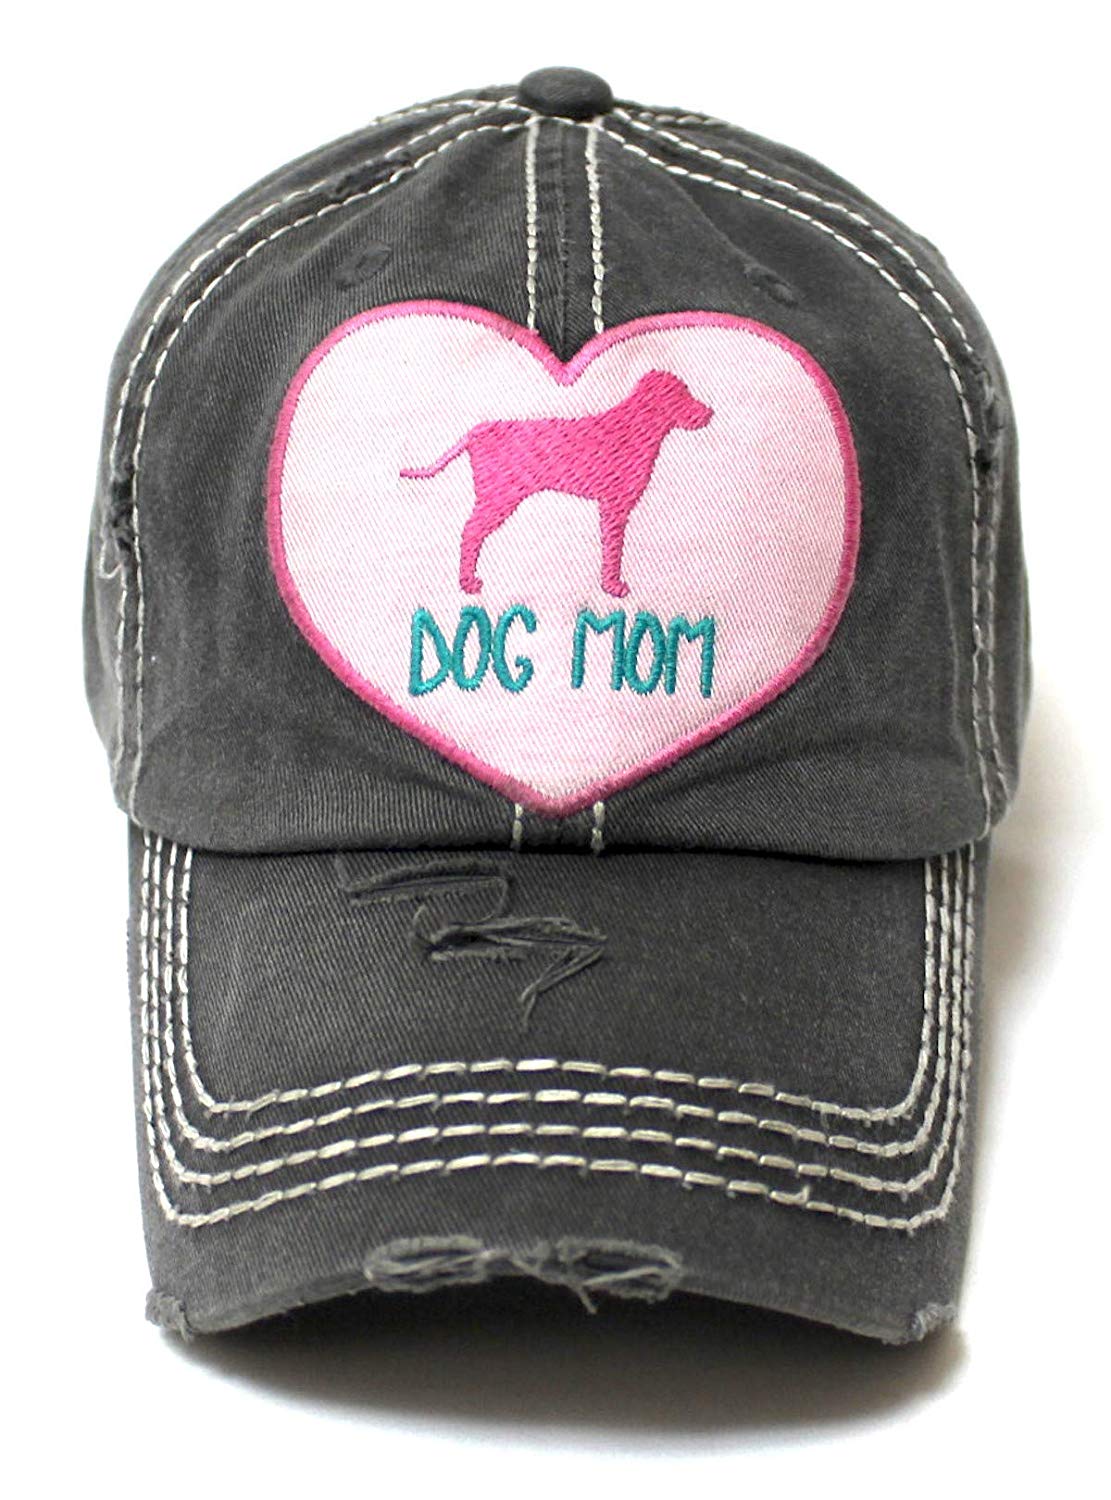 Women's Love Pink Cap Dog MOM Heart Patch Embroidery, Blk - Caps 'N Vintage 